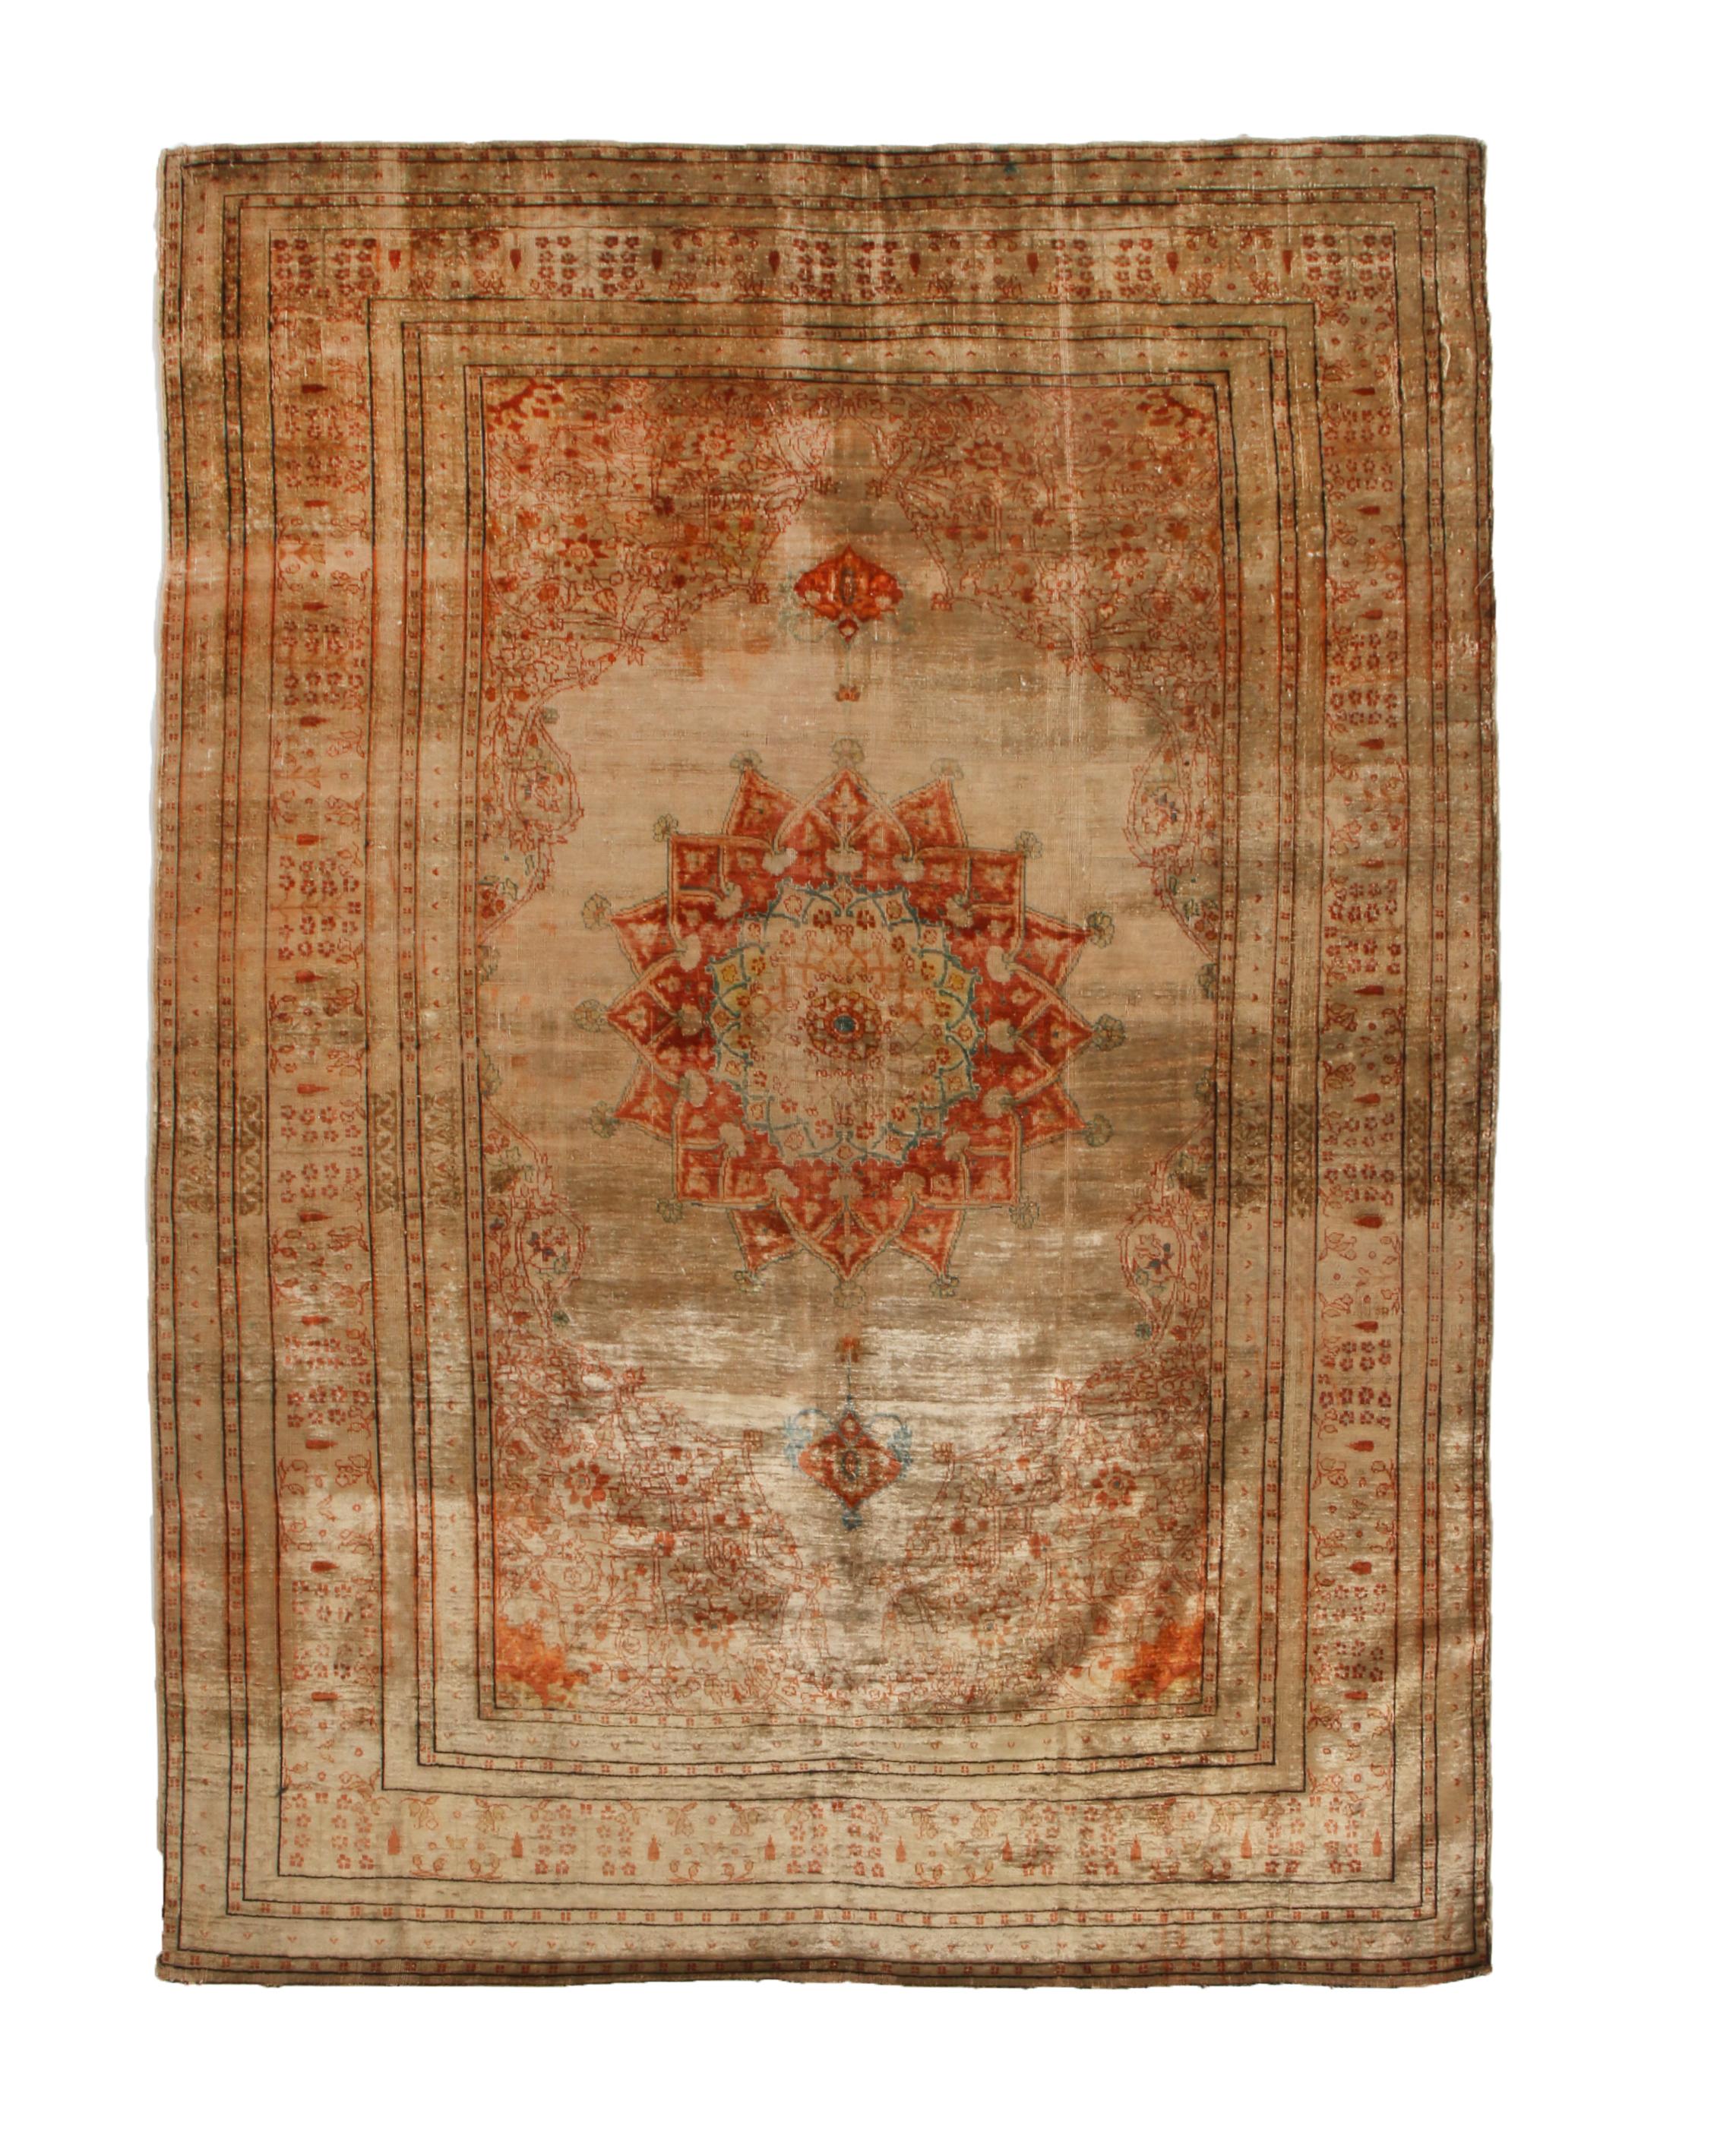 Originating from Persia in 1910, this antique Tabriz Persian rug is hand knotted with a soft, quality wool pile married to some of the most distinguished muted and vibrant colourways. Featuring a medallion style field design in elevated brown and